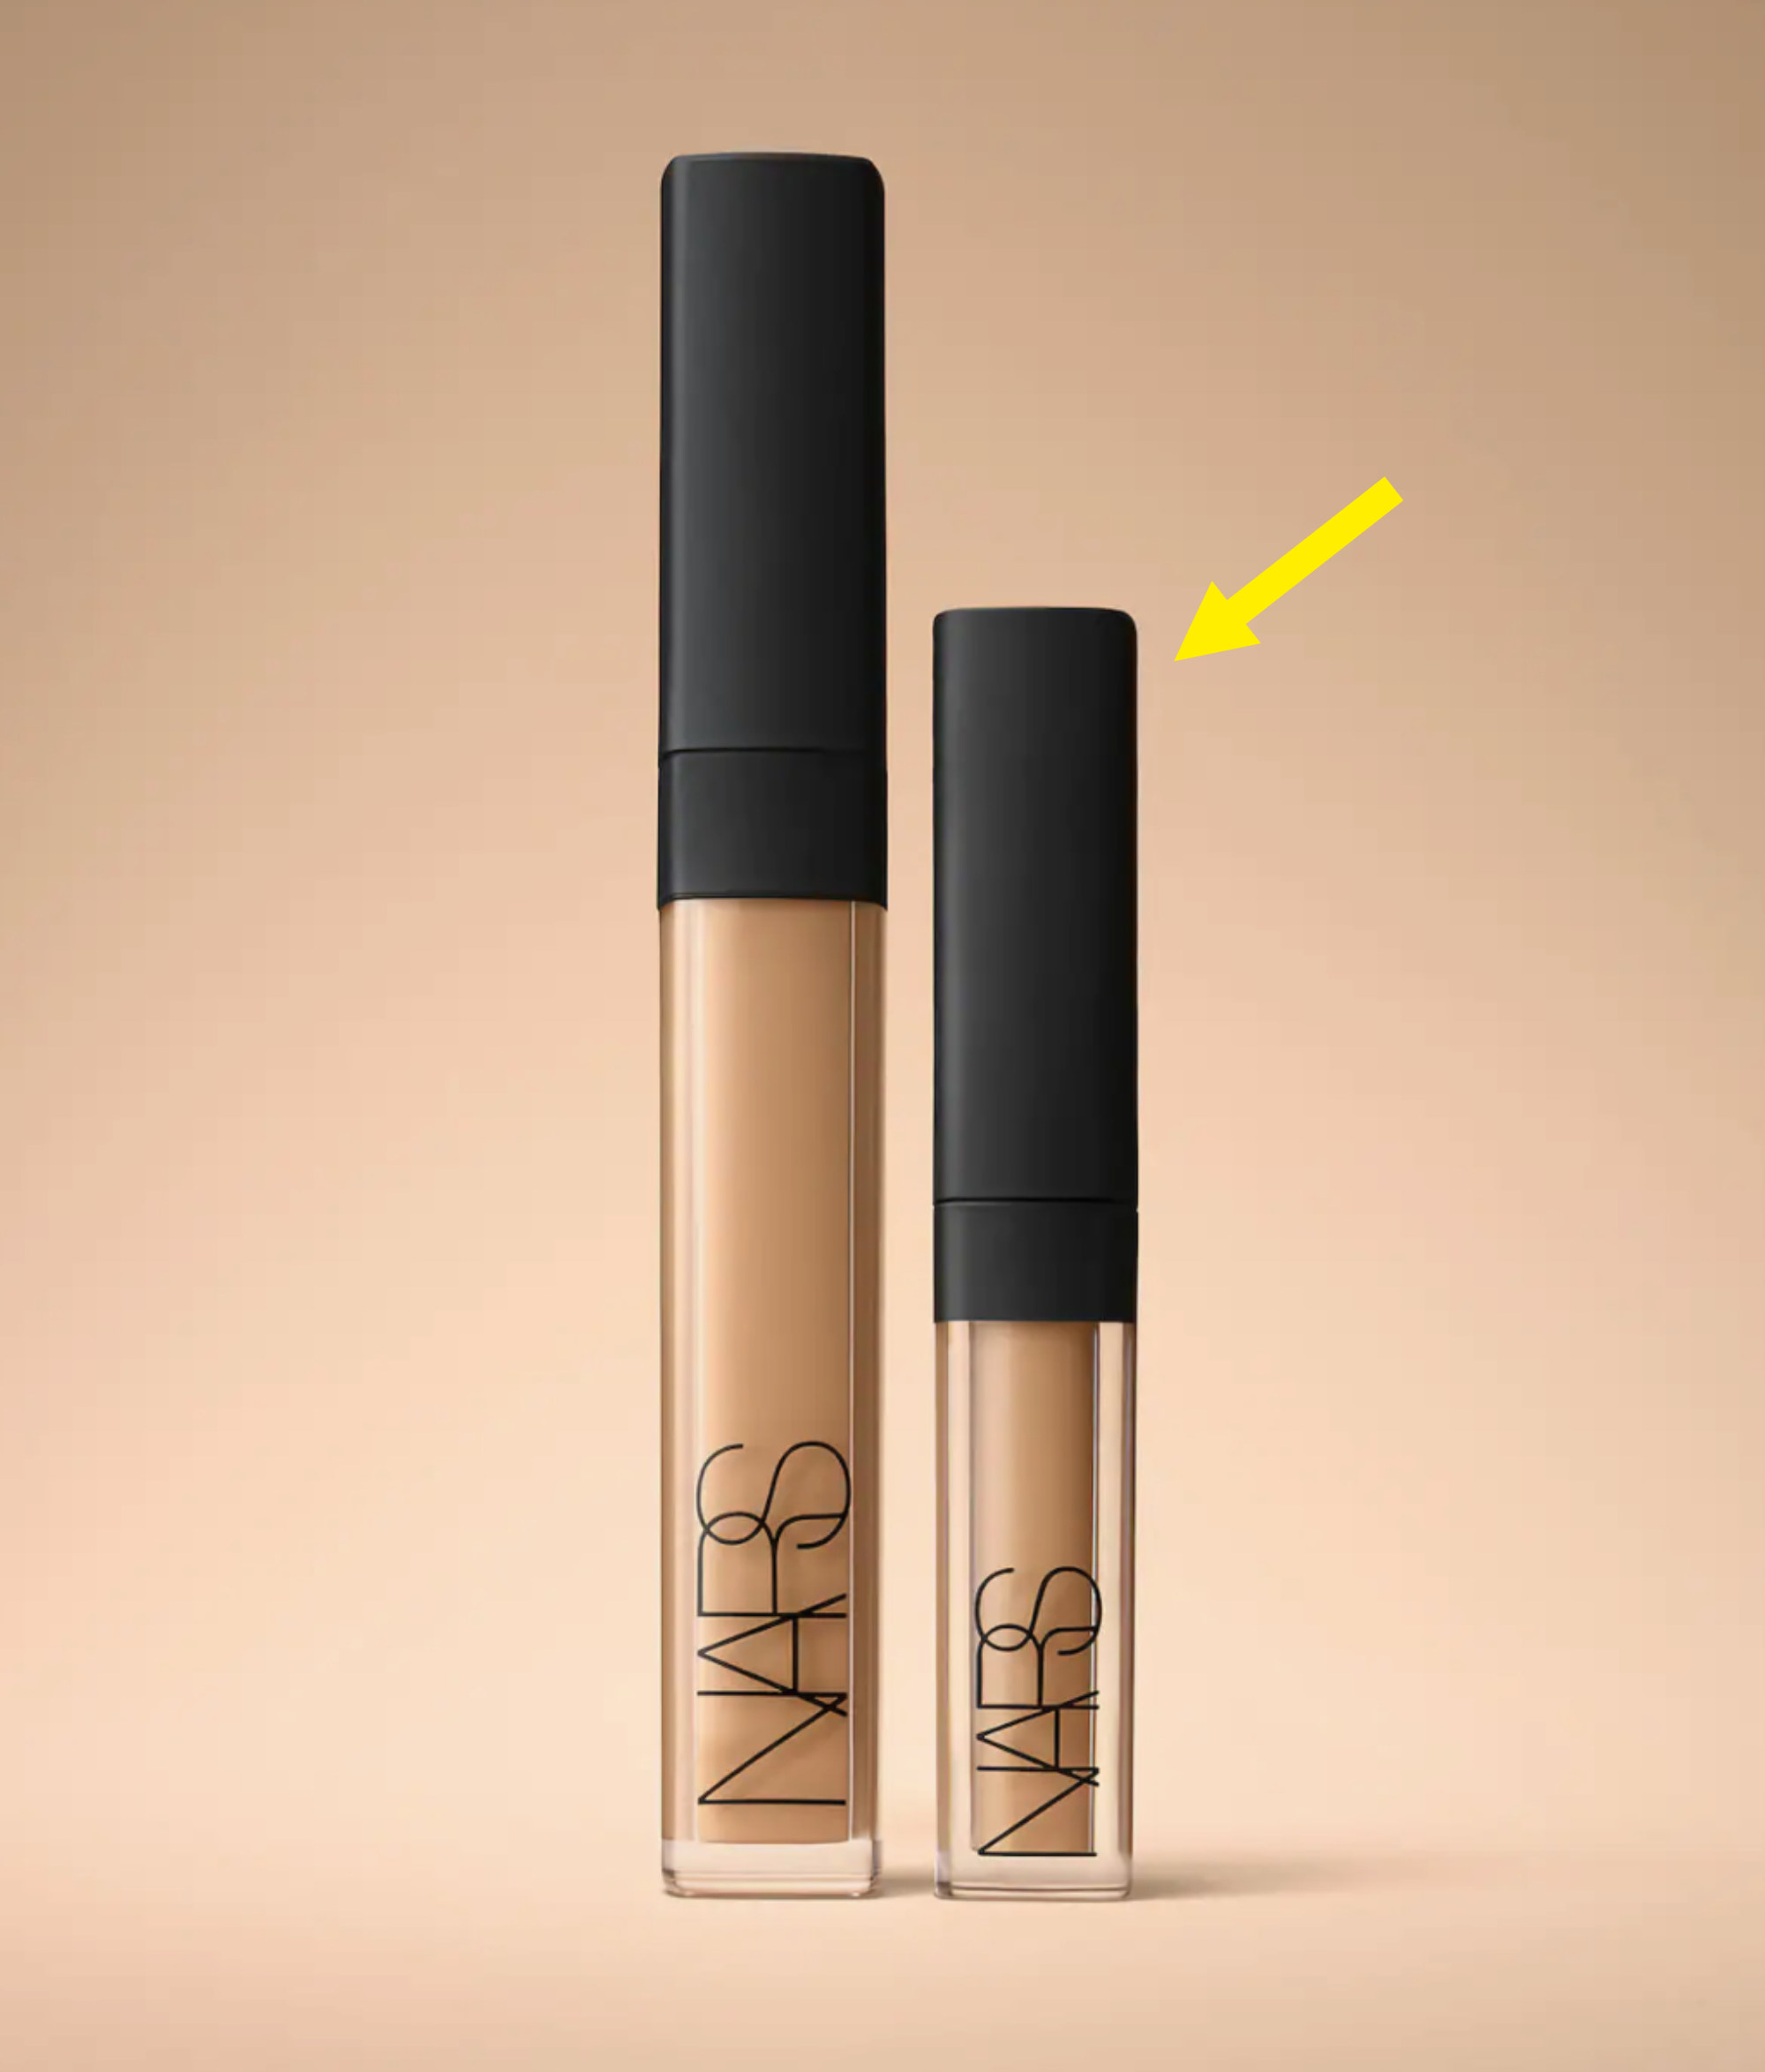 the regular sized concealer and the mini next to each other with an arrow pointing to the smaller one